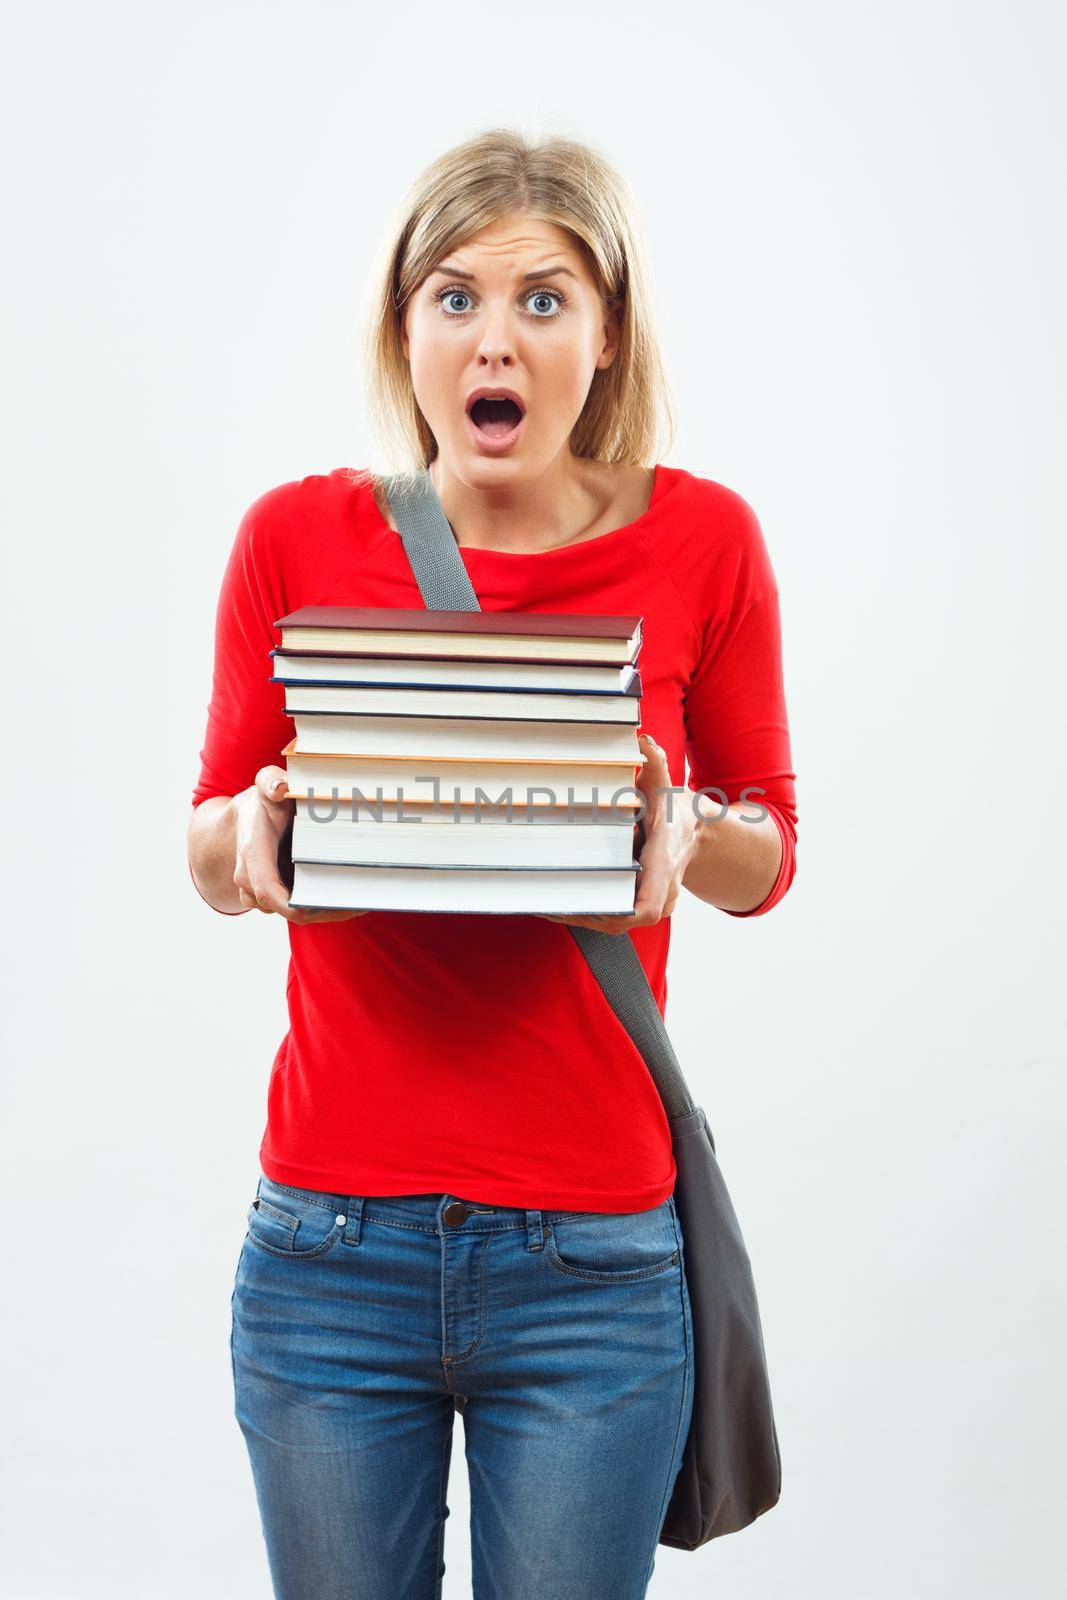 Image of  female student in panic with books.